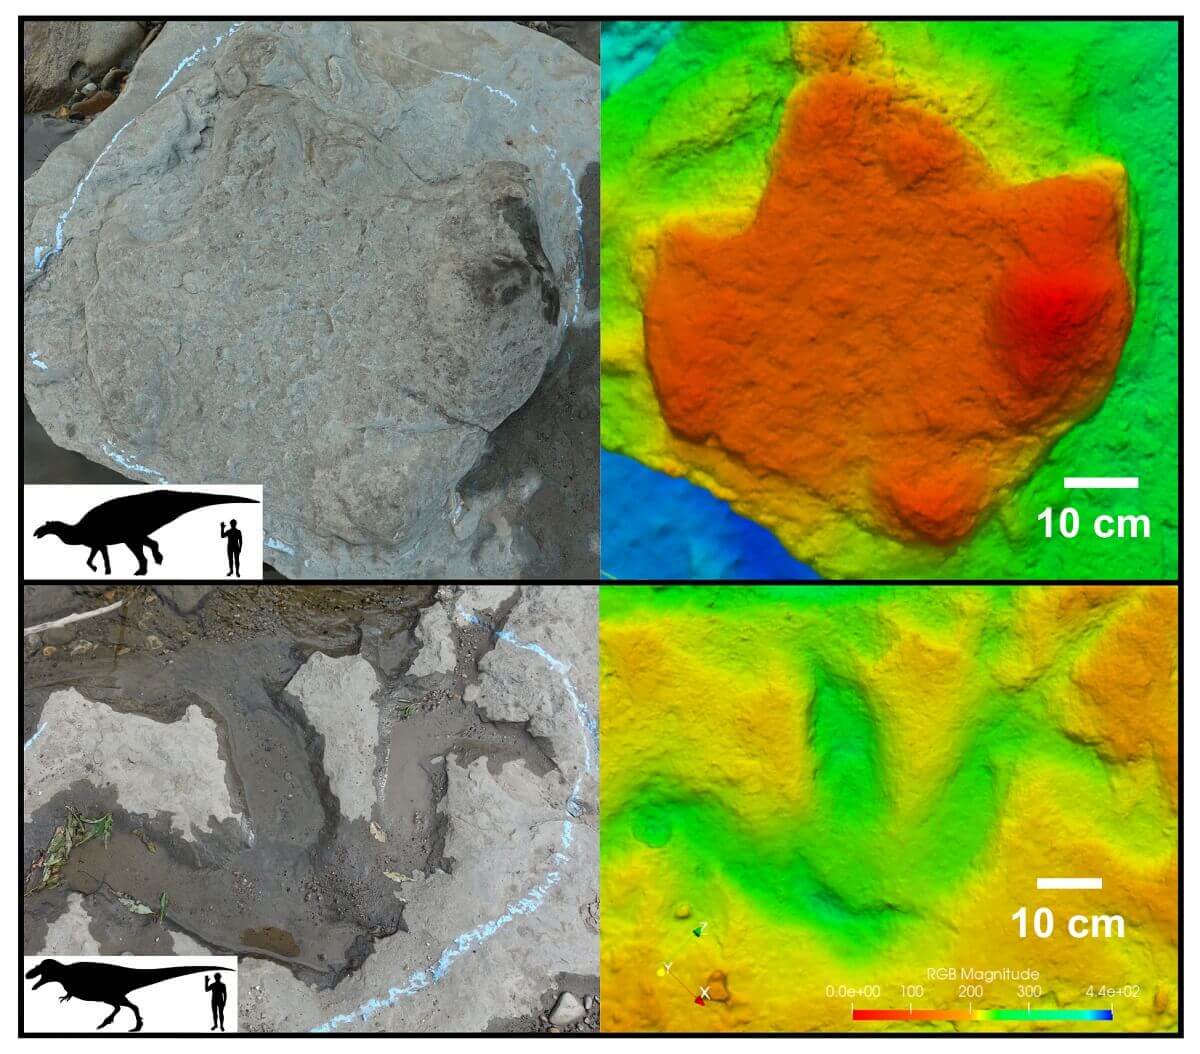 Four photos showing two types of dino footprints